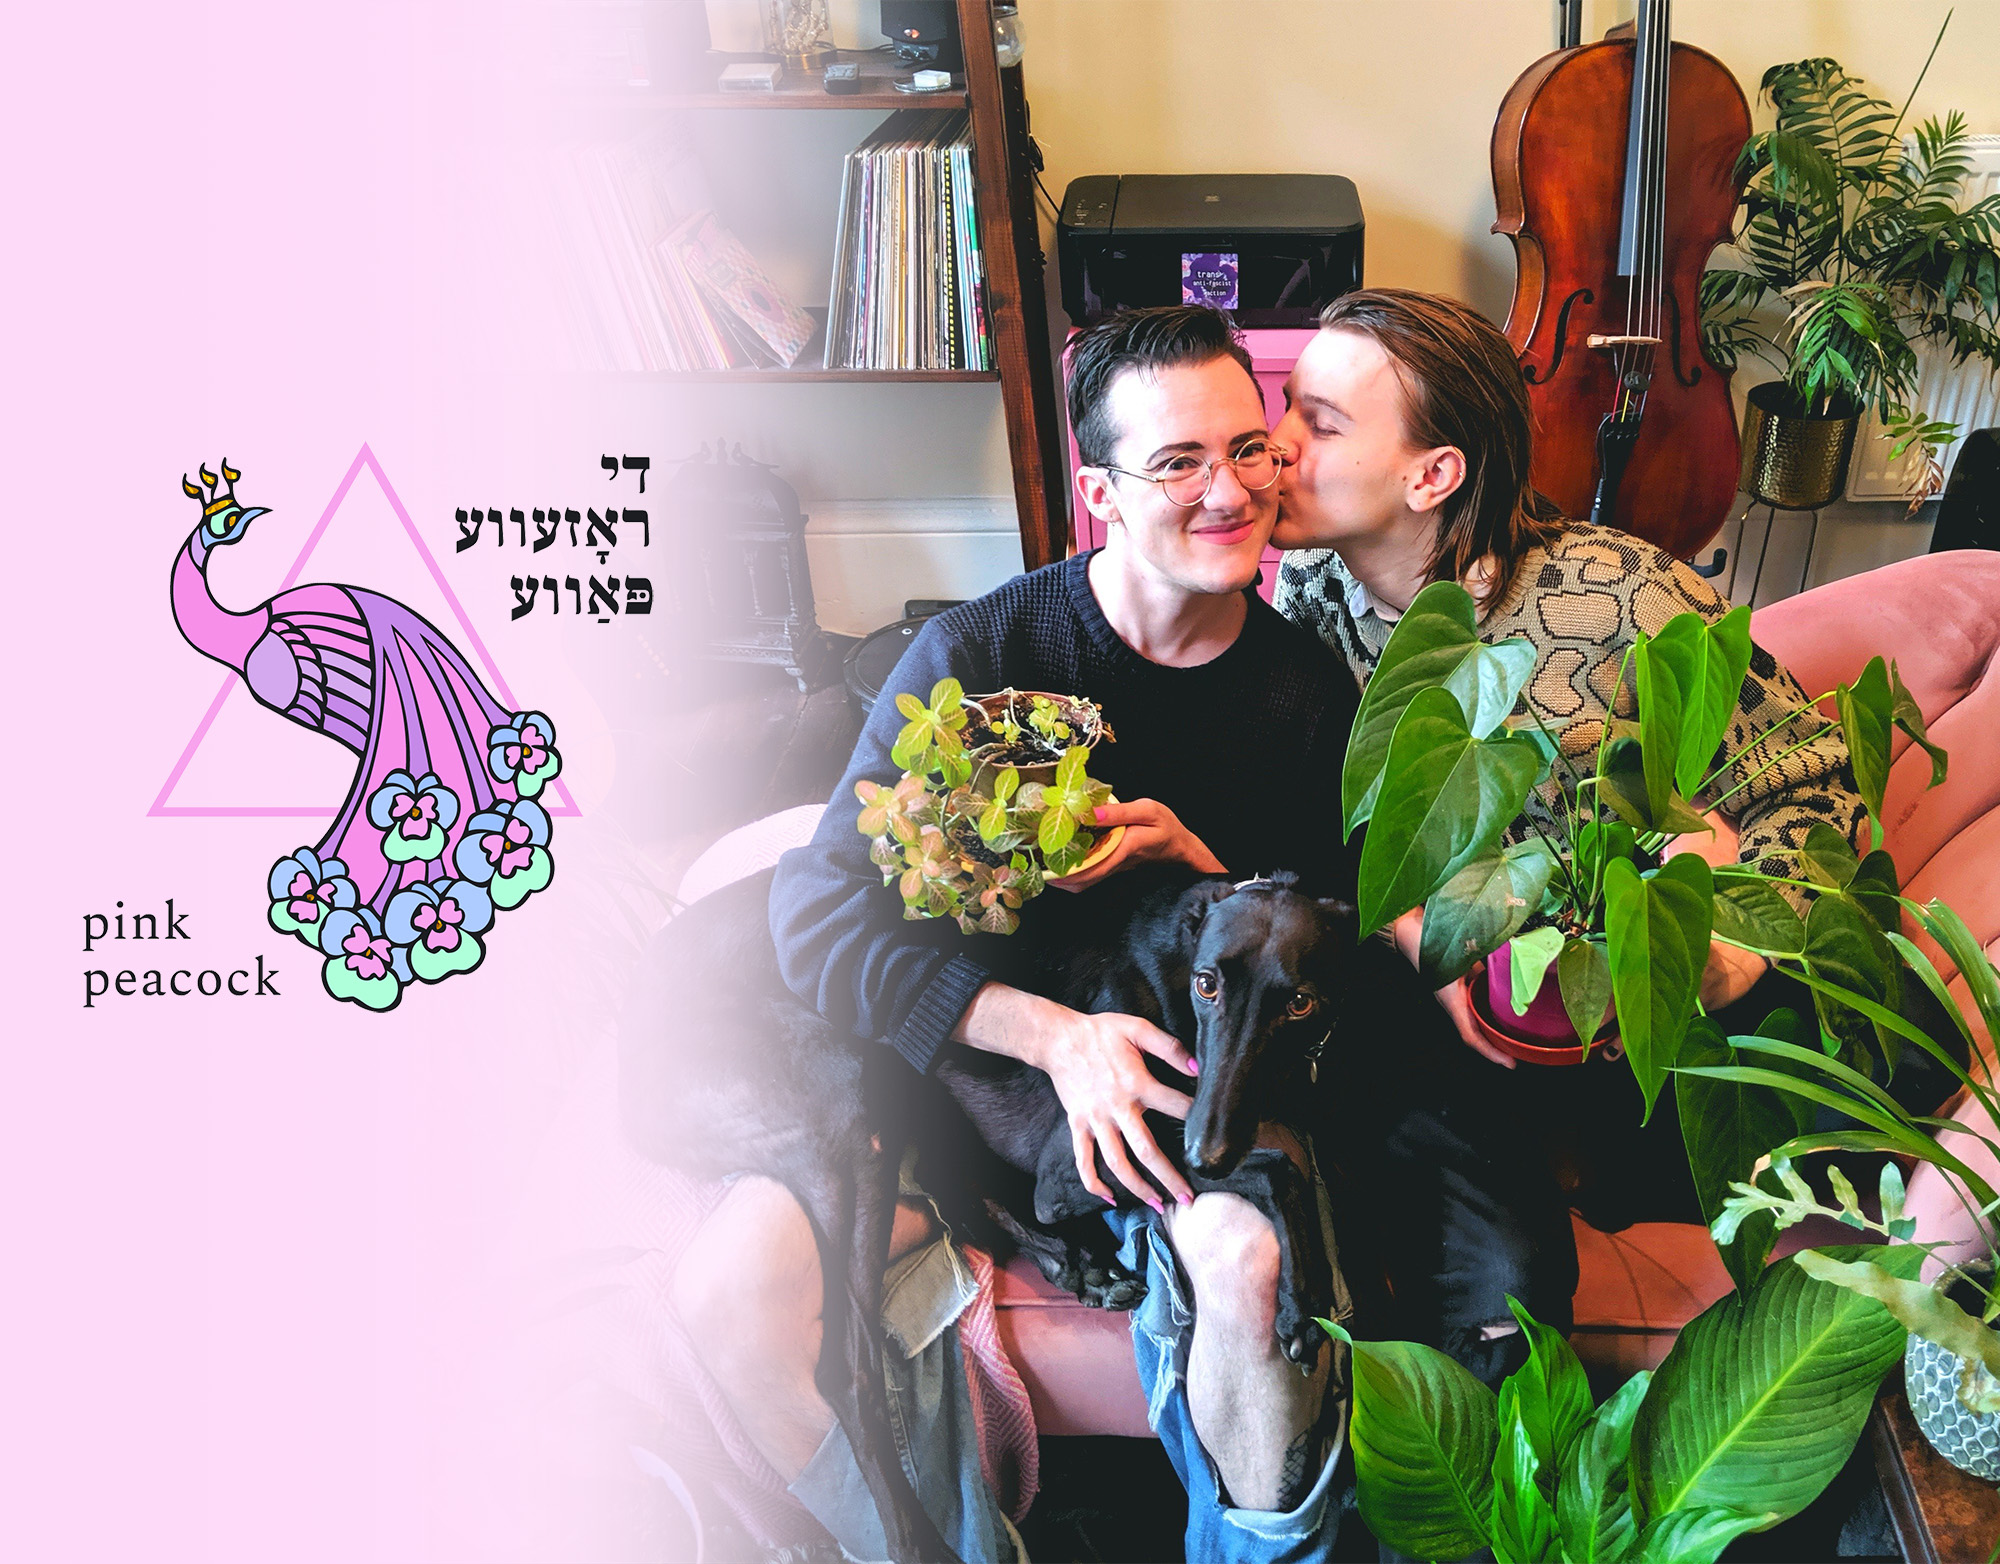 Morgan and Joe of the Pink Peacock sit on a couch, Joe kissing Morgan's cheek, surrounded by plants and books, with a black dog in Morgan's lap.